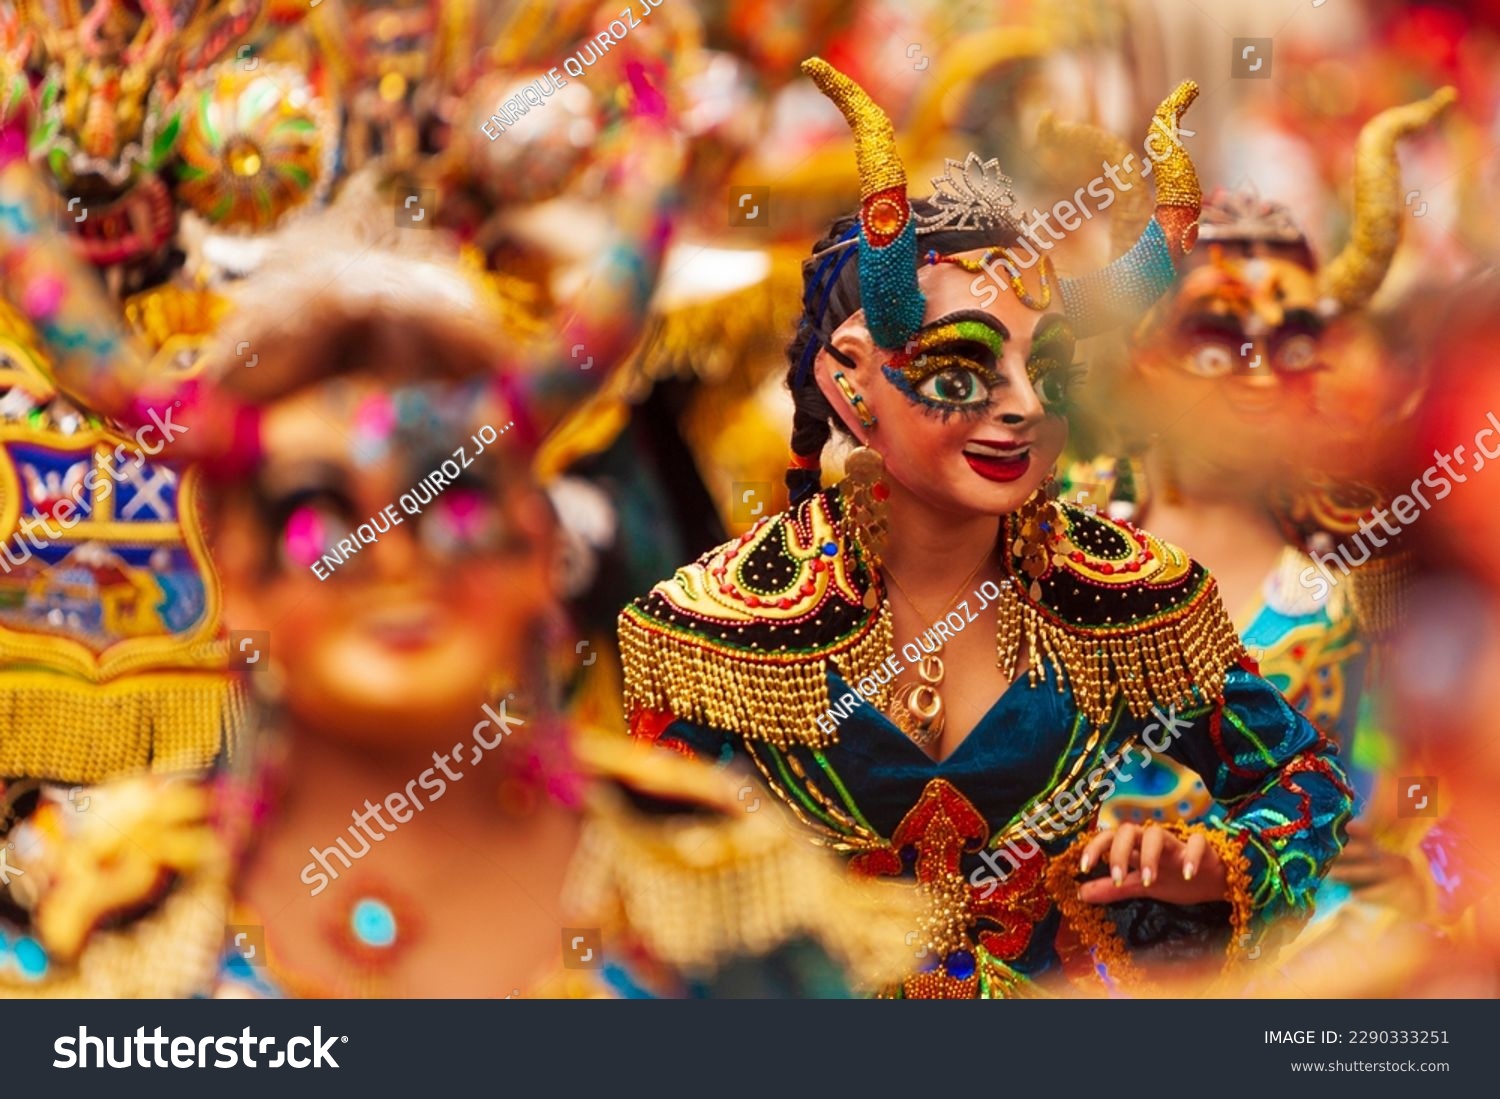 ORURO, BOLIVIA: Dancers at Oruro Carnival in Bolivia. Religious, folkloric and cultural festival declared as a "Masterpiece of the Oral and Intangible Heritage of Humanity" (Unesco) in 2001. #2290333251